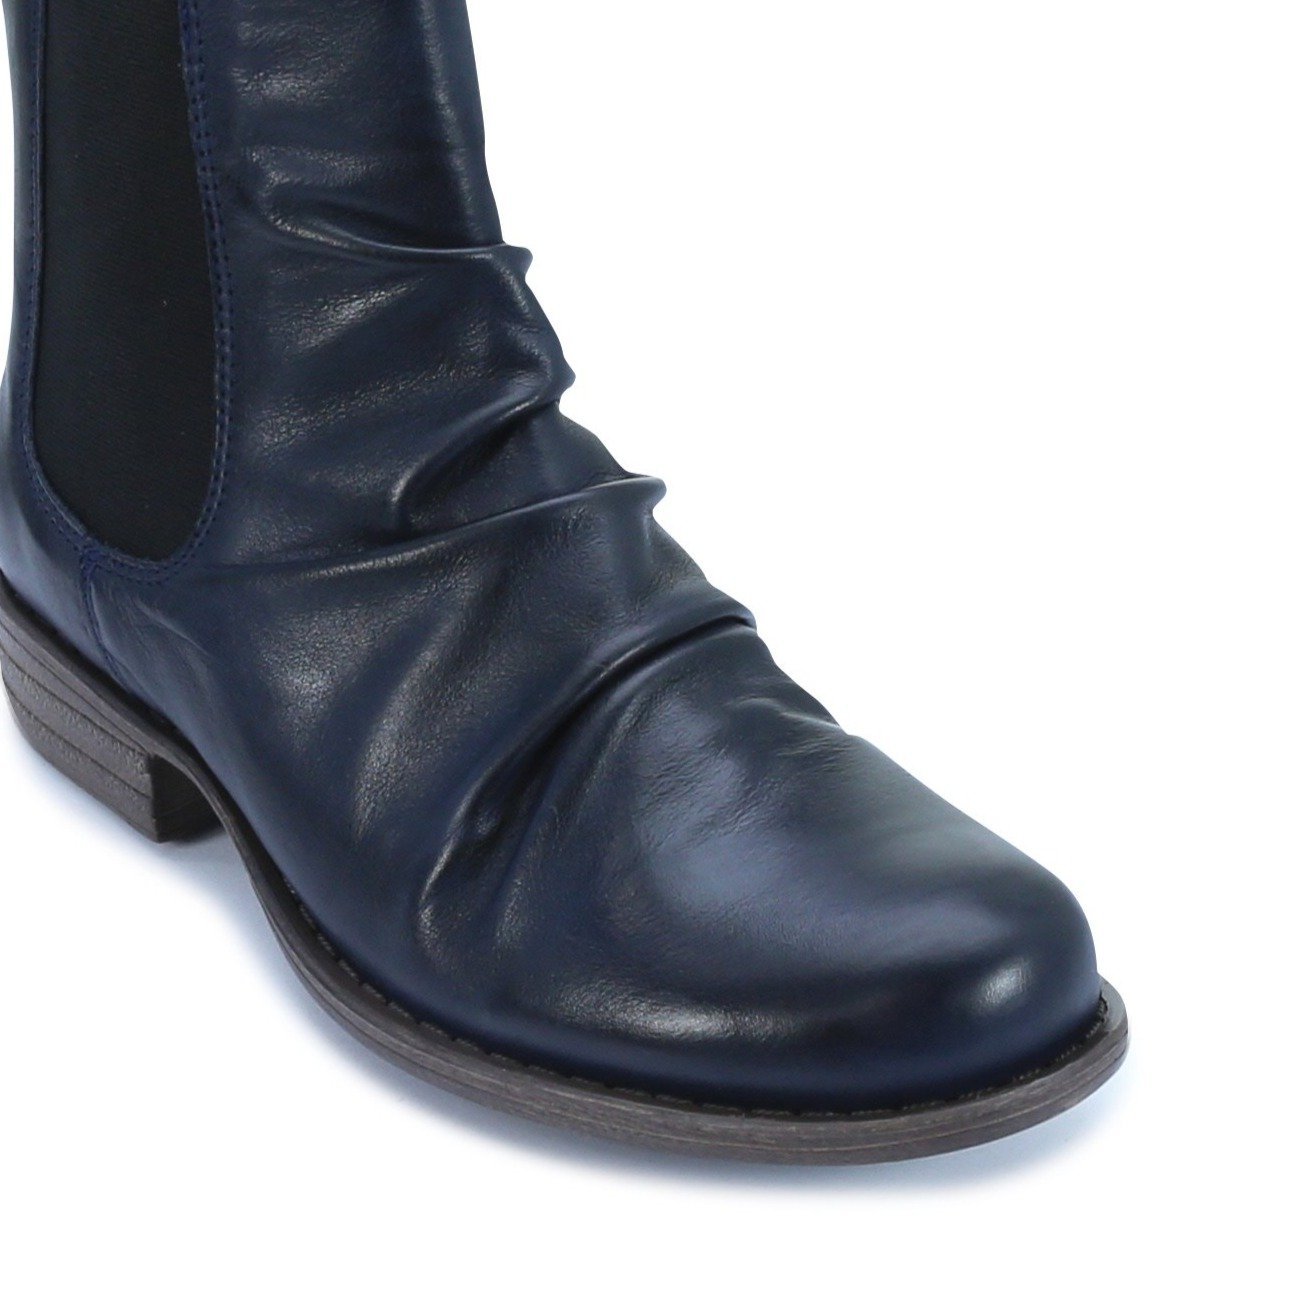 WILLO - EOS Footwear - ANKLE BOOTS #color_perf black